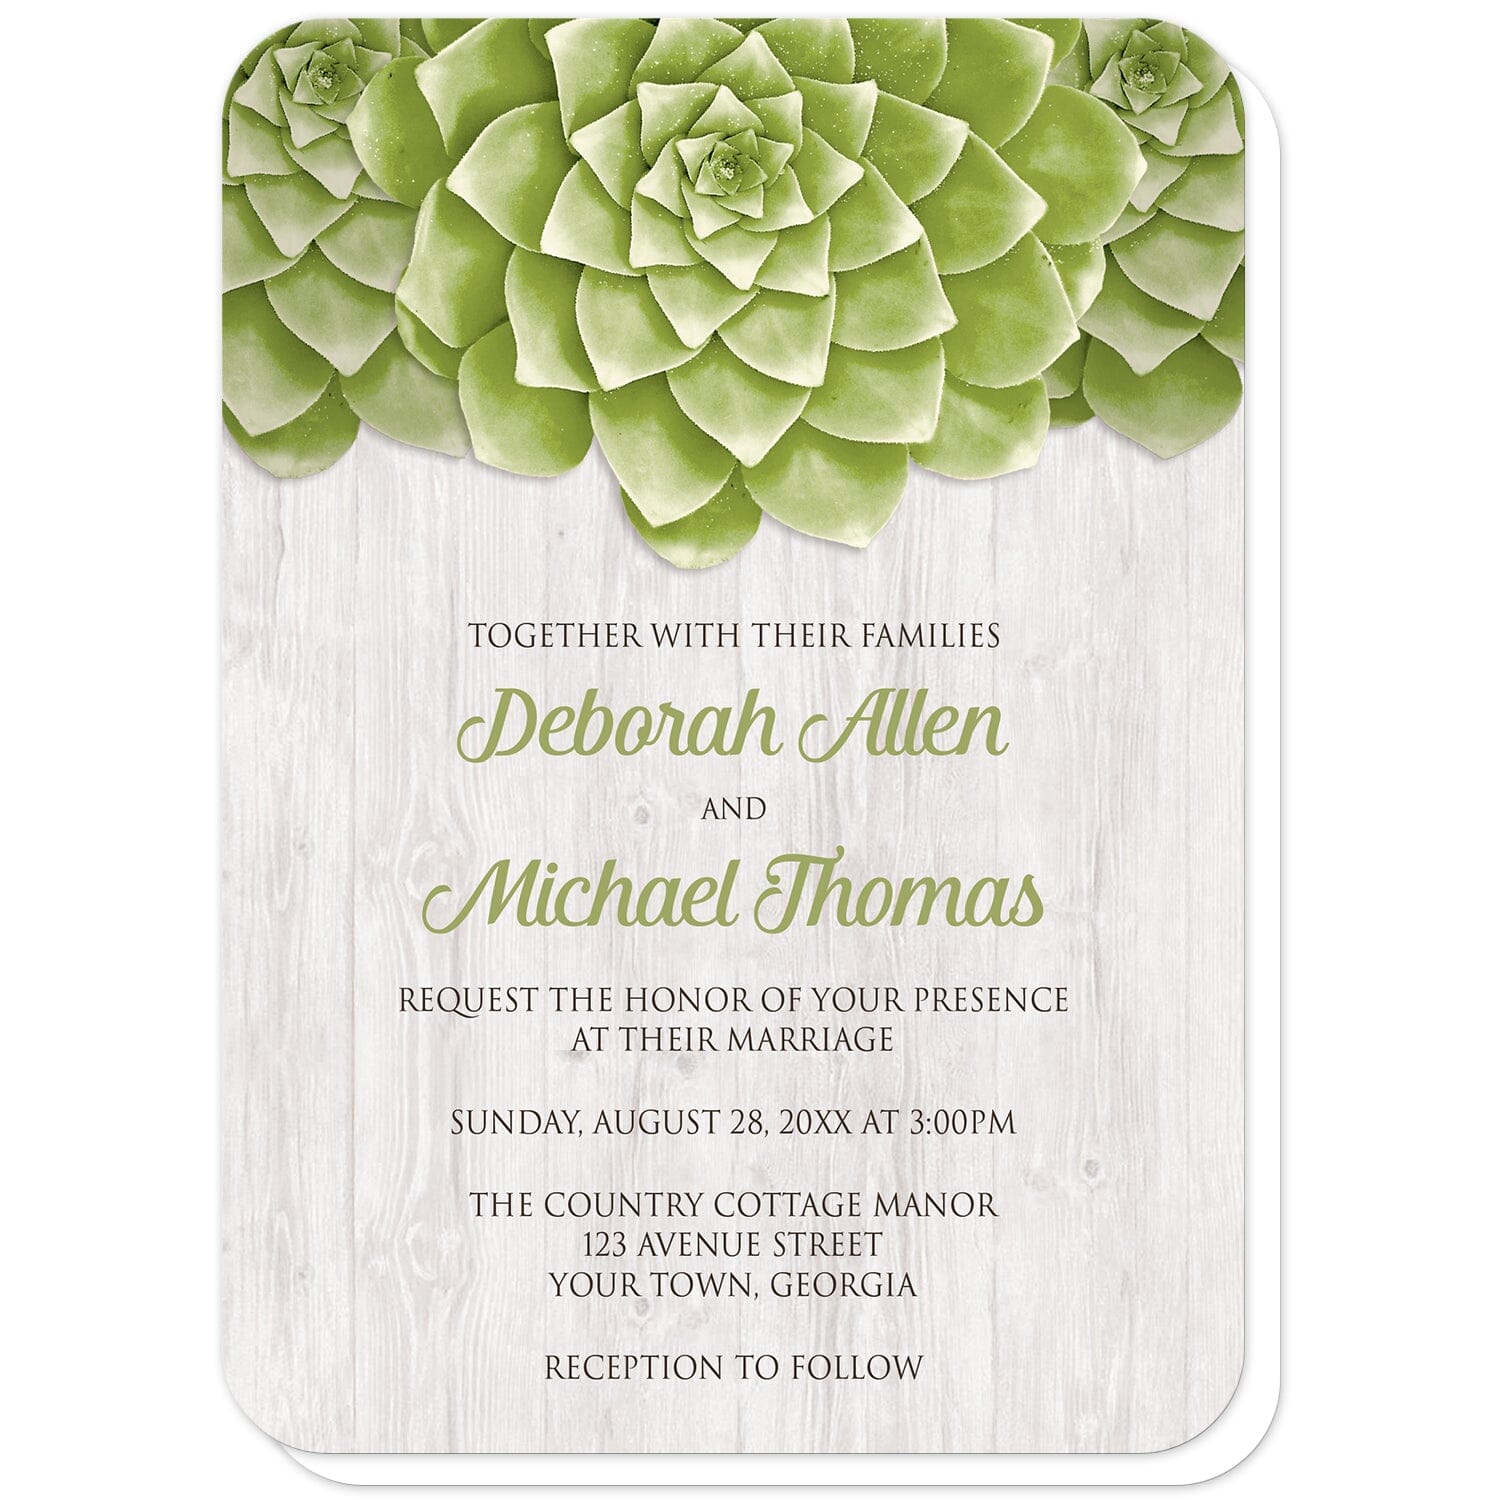 Succulent Whitewashed Wood Wedding Invitations (with rounded corners) at Artistically Invited. Cool and fresh succulent whitewashed wood wedding invitations with three large green succulents along the top of the invitations over a rustic whitewashed wood background design. Your personalized marriage celebration details are custom printed in green and dark brown over the whitewashed wood background below the succulents. 